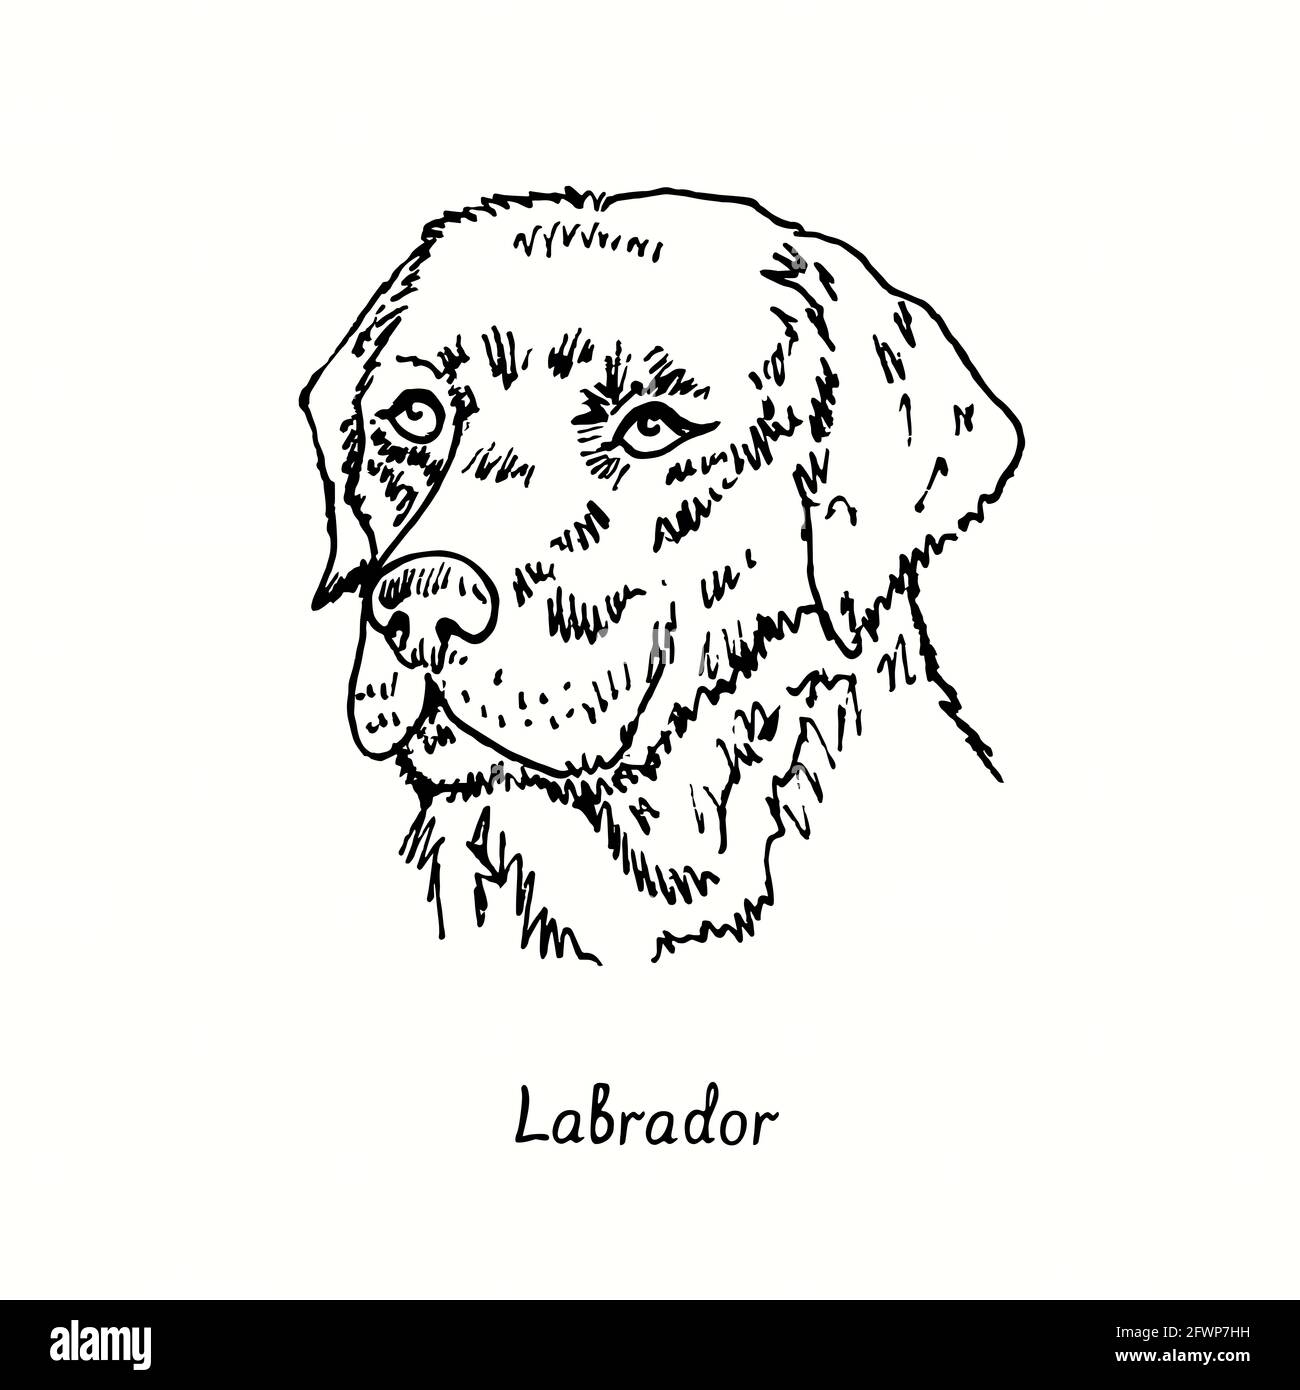 Labrador Retriever muzzle front view. Ink black and white doodle drawing in woodcut style. Stock Photo